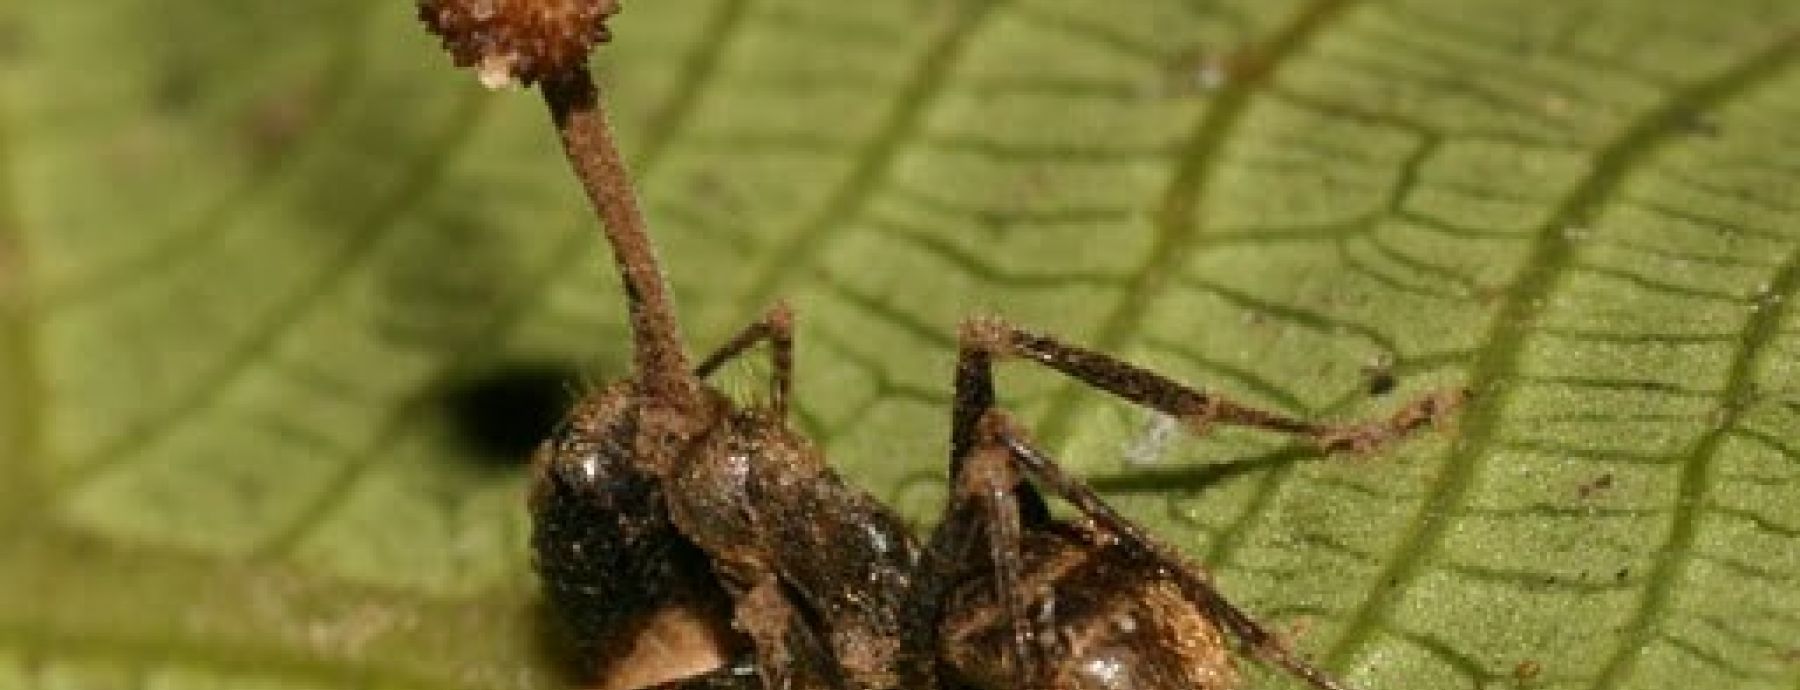 Zombie ants controlled by parasitic fungal infection